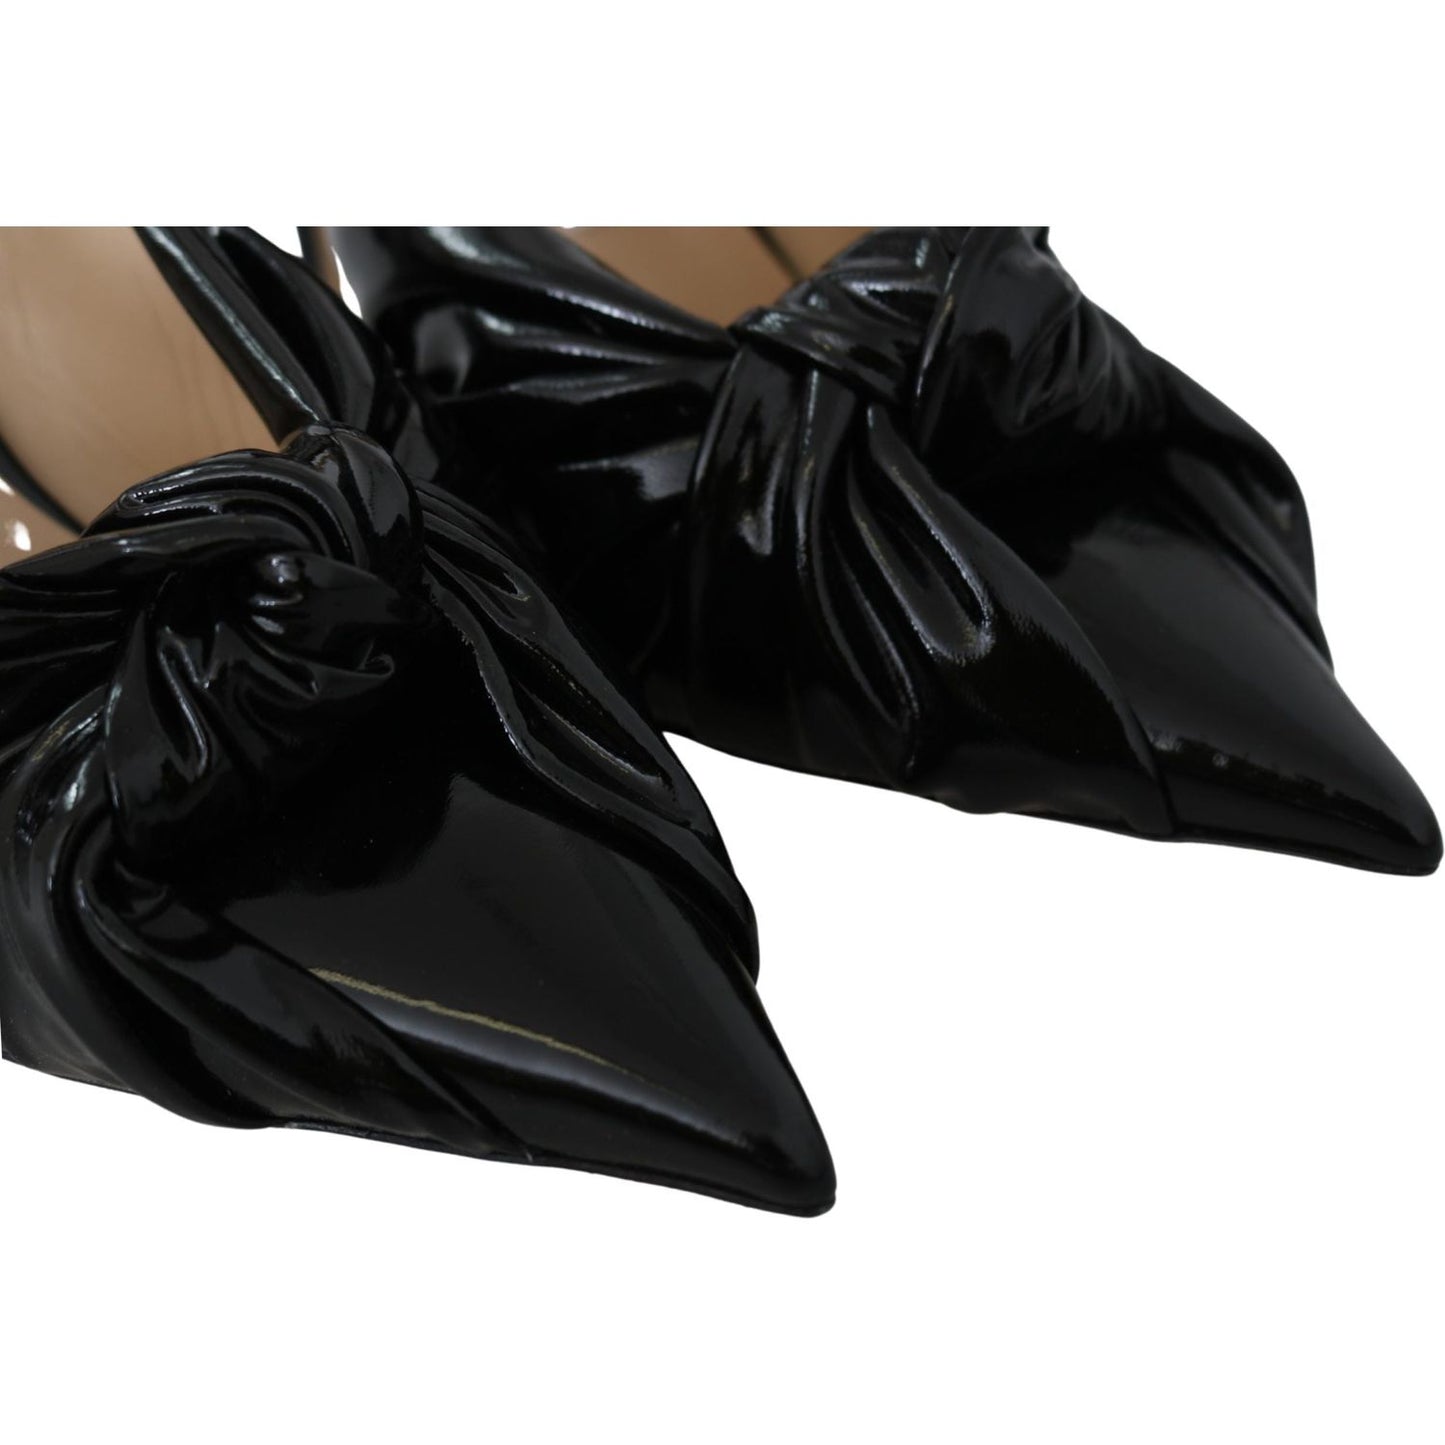 Jimmy Choo Elegant Black Leather Pointed Toe Pumps Shoes annabell-85-black-patent-leather-pumps